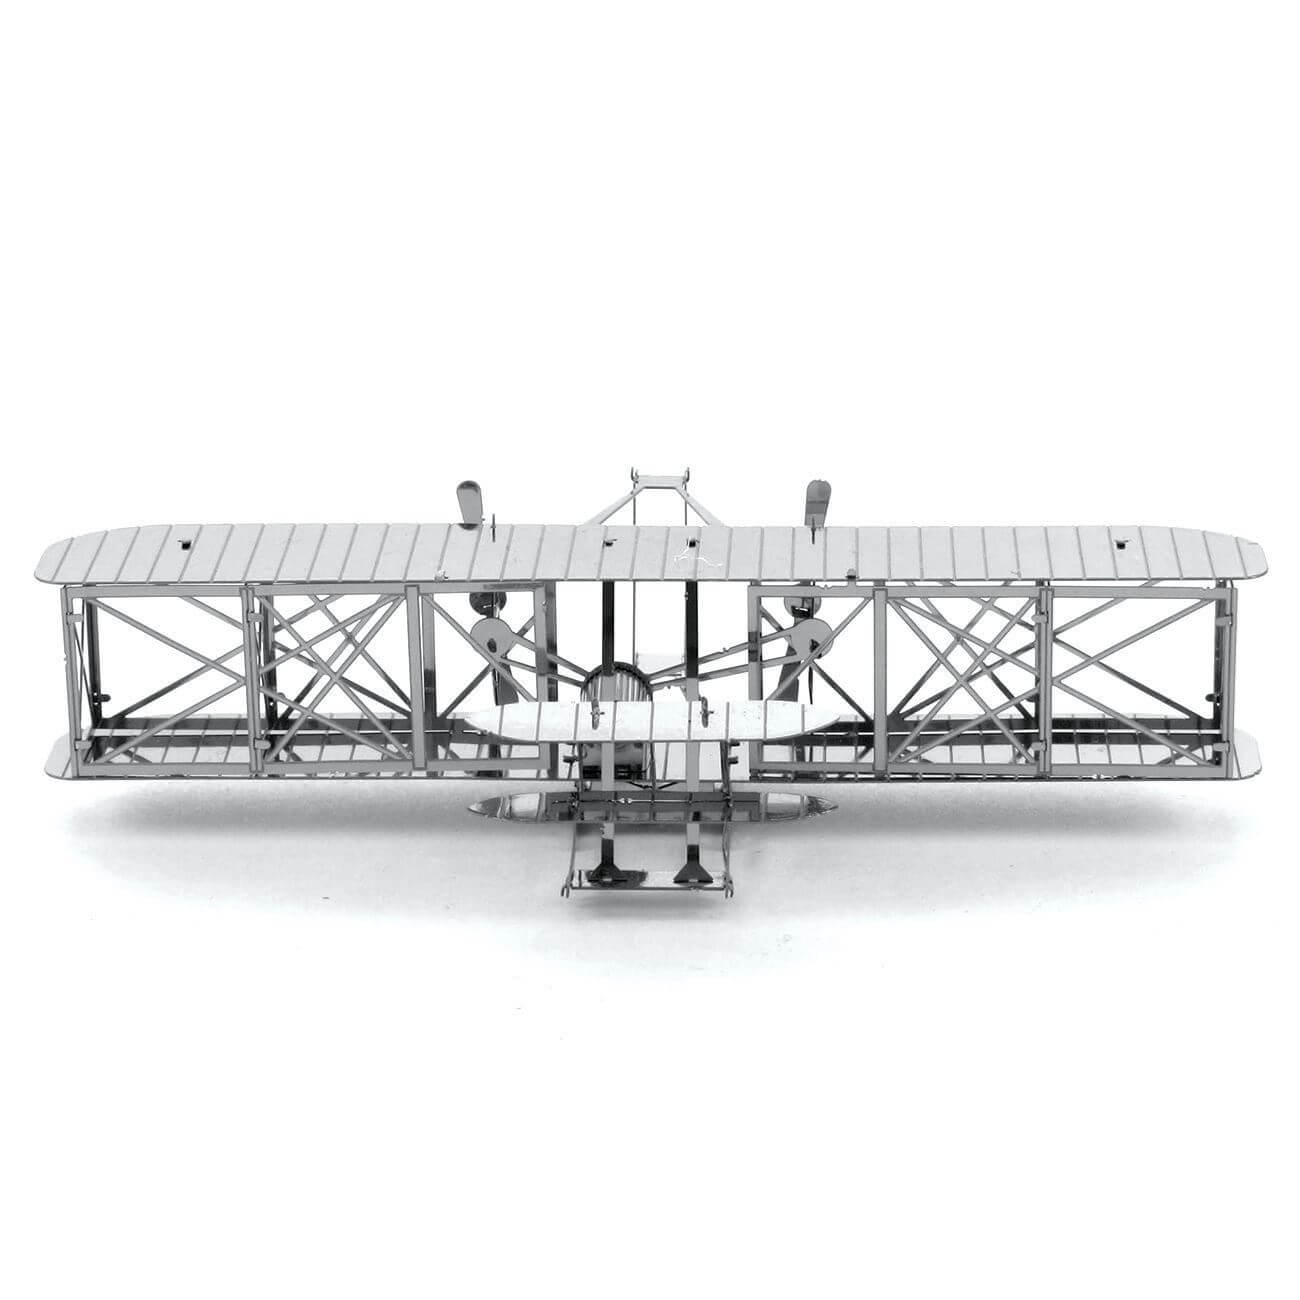 Back view of the Metal Earth Wright Brothers Airplane Metal Model Kit - 1 Sheet.